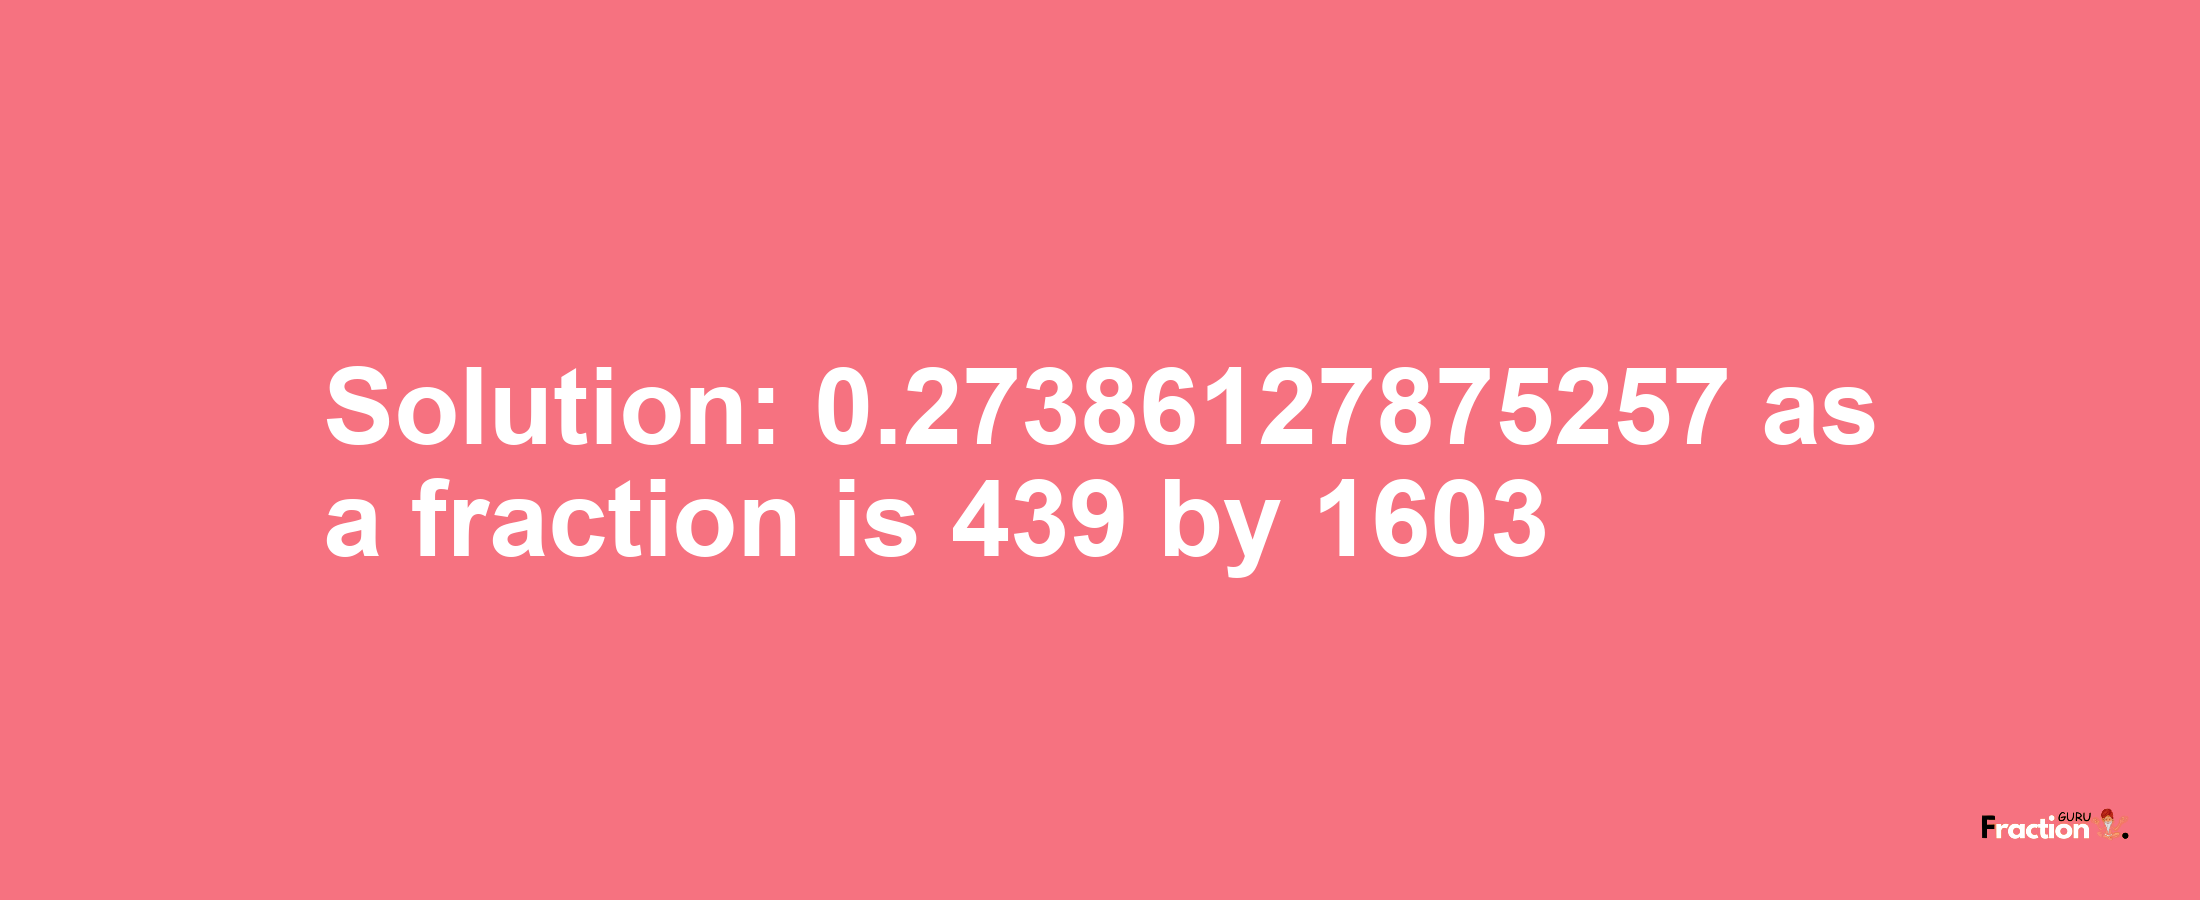 Solution:0.27386127875257 as a fraction is 439/1603